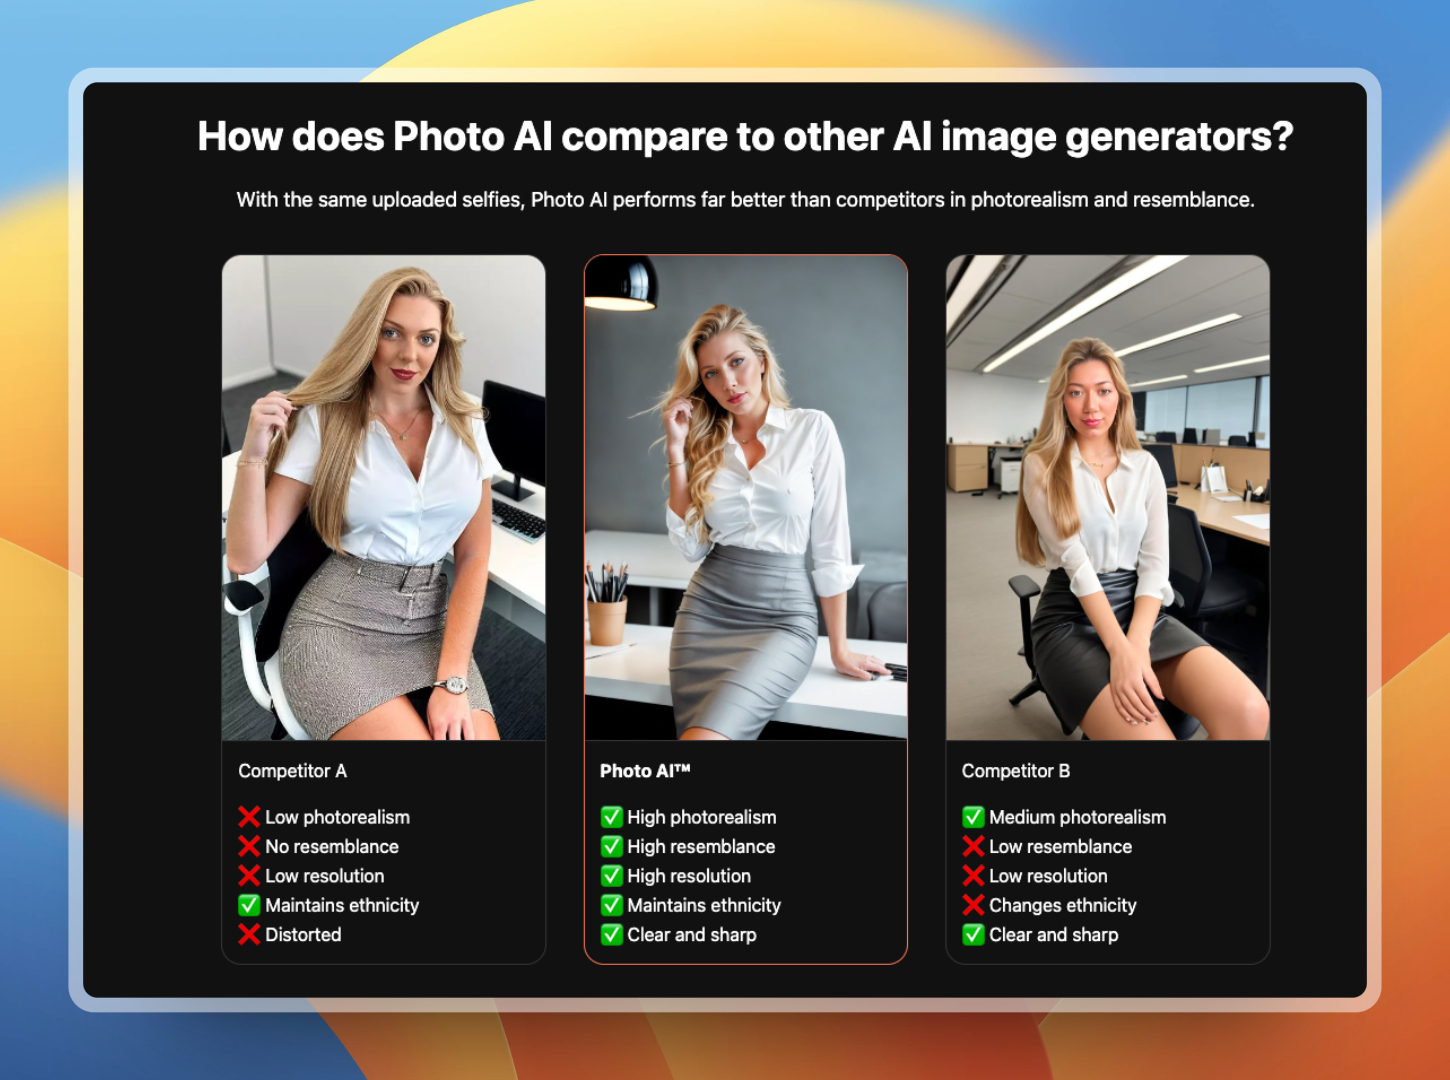 How Photo AI compares to other AI image generators